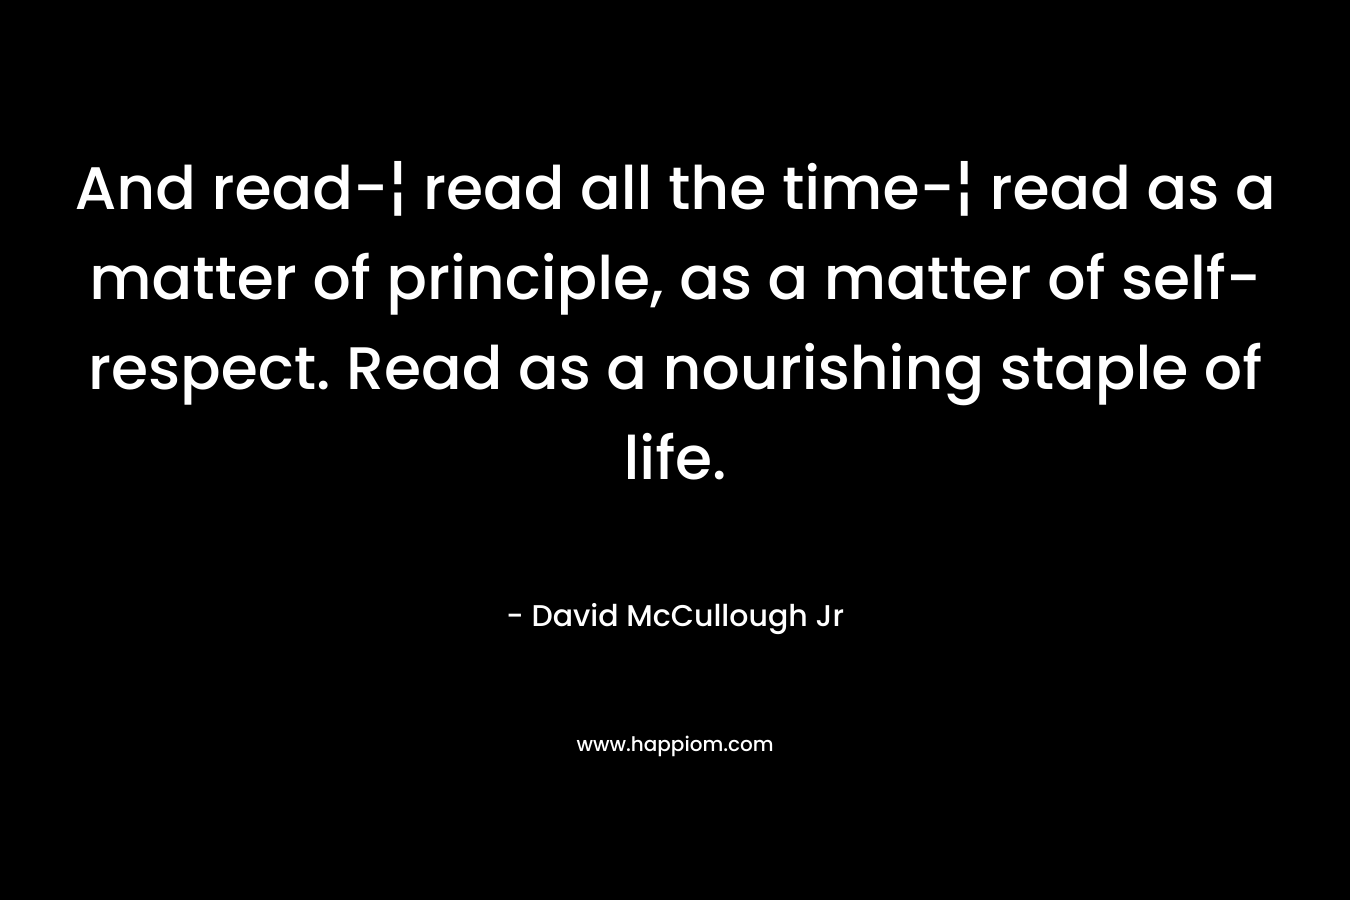 And read-¦ read all the time-¦ read as a matter of principle, as a matter of self-respect. Read as a nourishing staple of life.